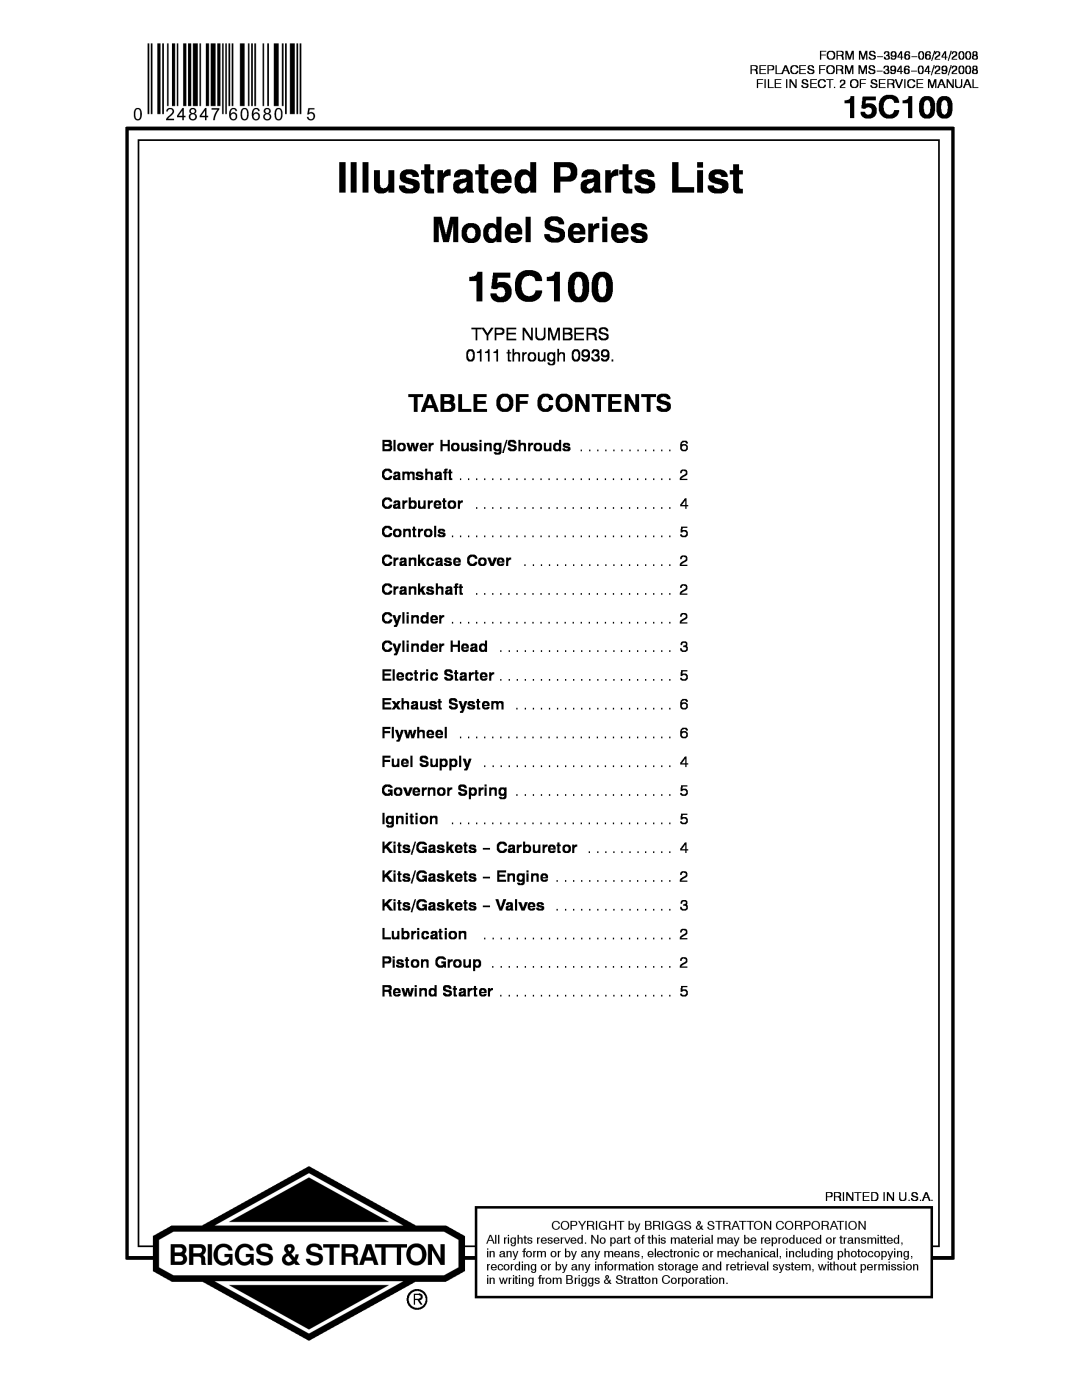 Briggs & Stratton 15C100 service manual Illustrated Parts List, Model Series, Table Of Contents, TYPE NUMBERS 0111 through 